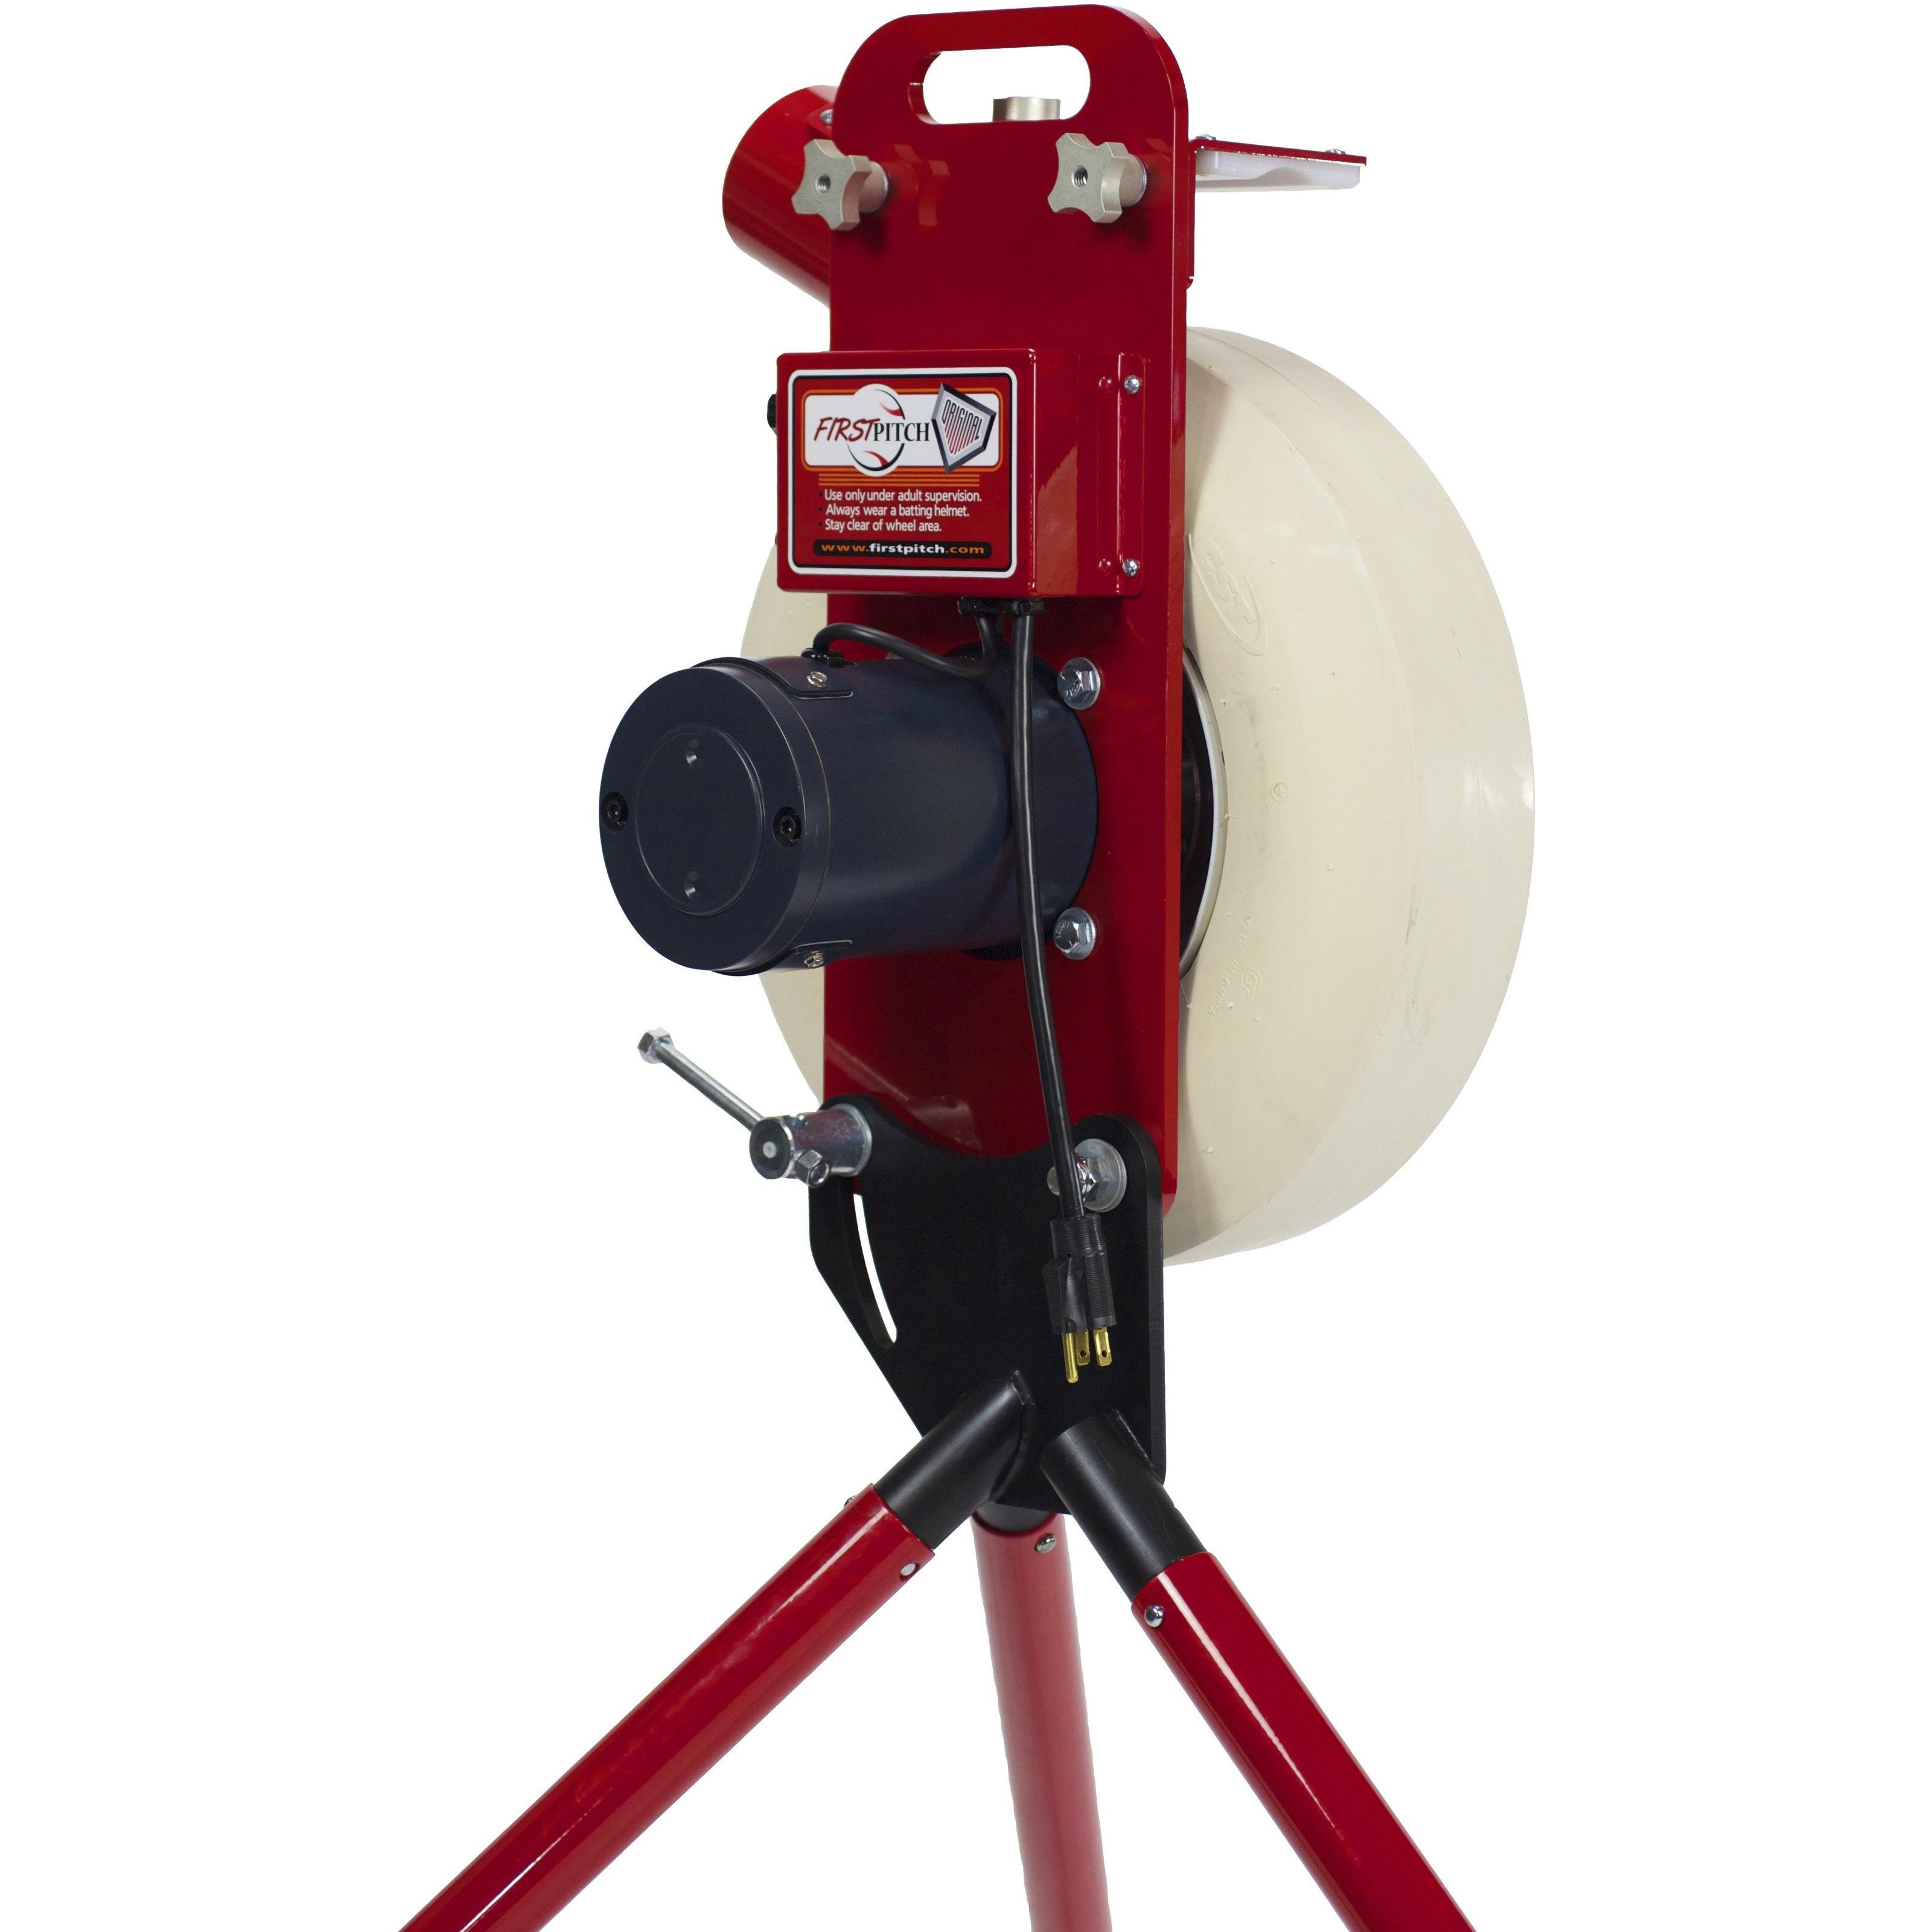 First Pitch Original Pitching Machine for Baseball and Softball Upper Side View